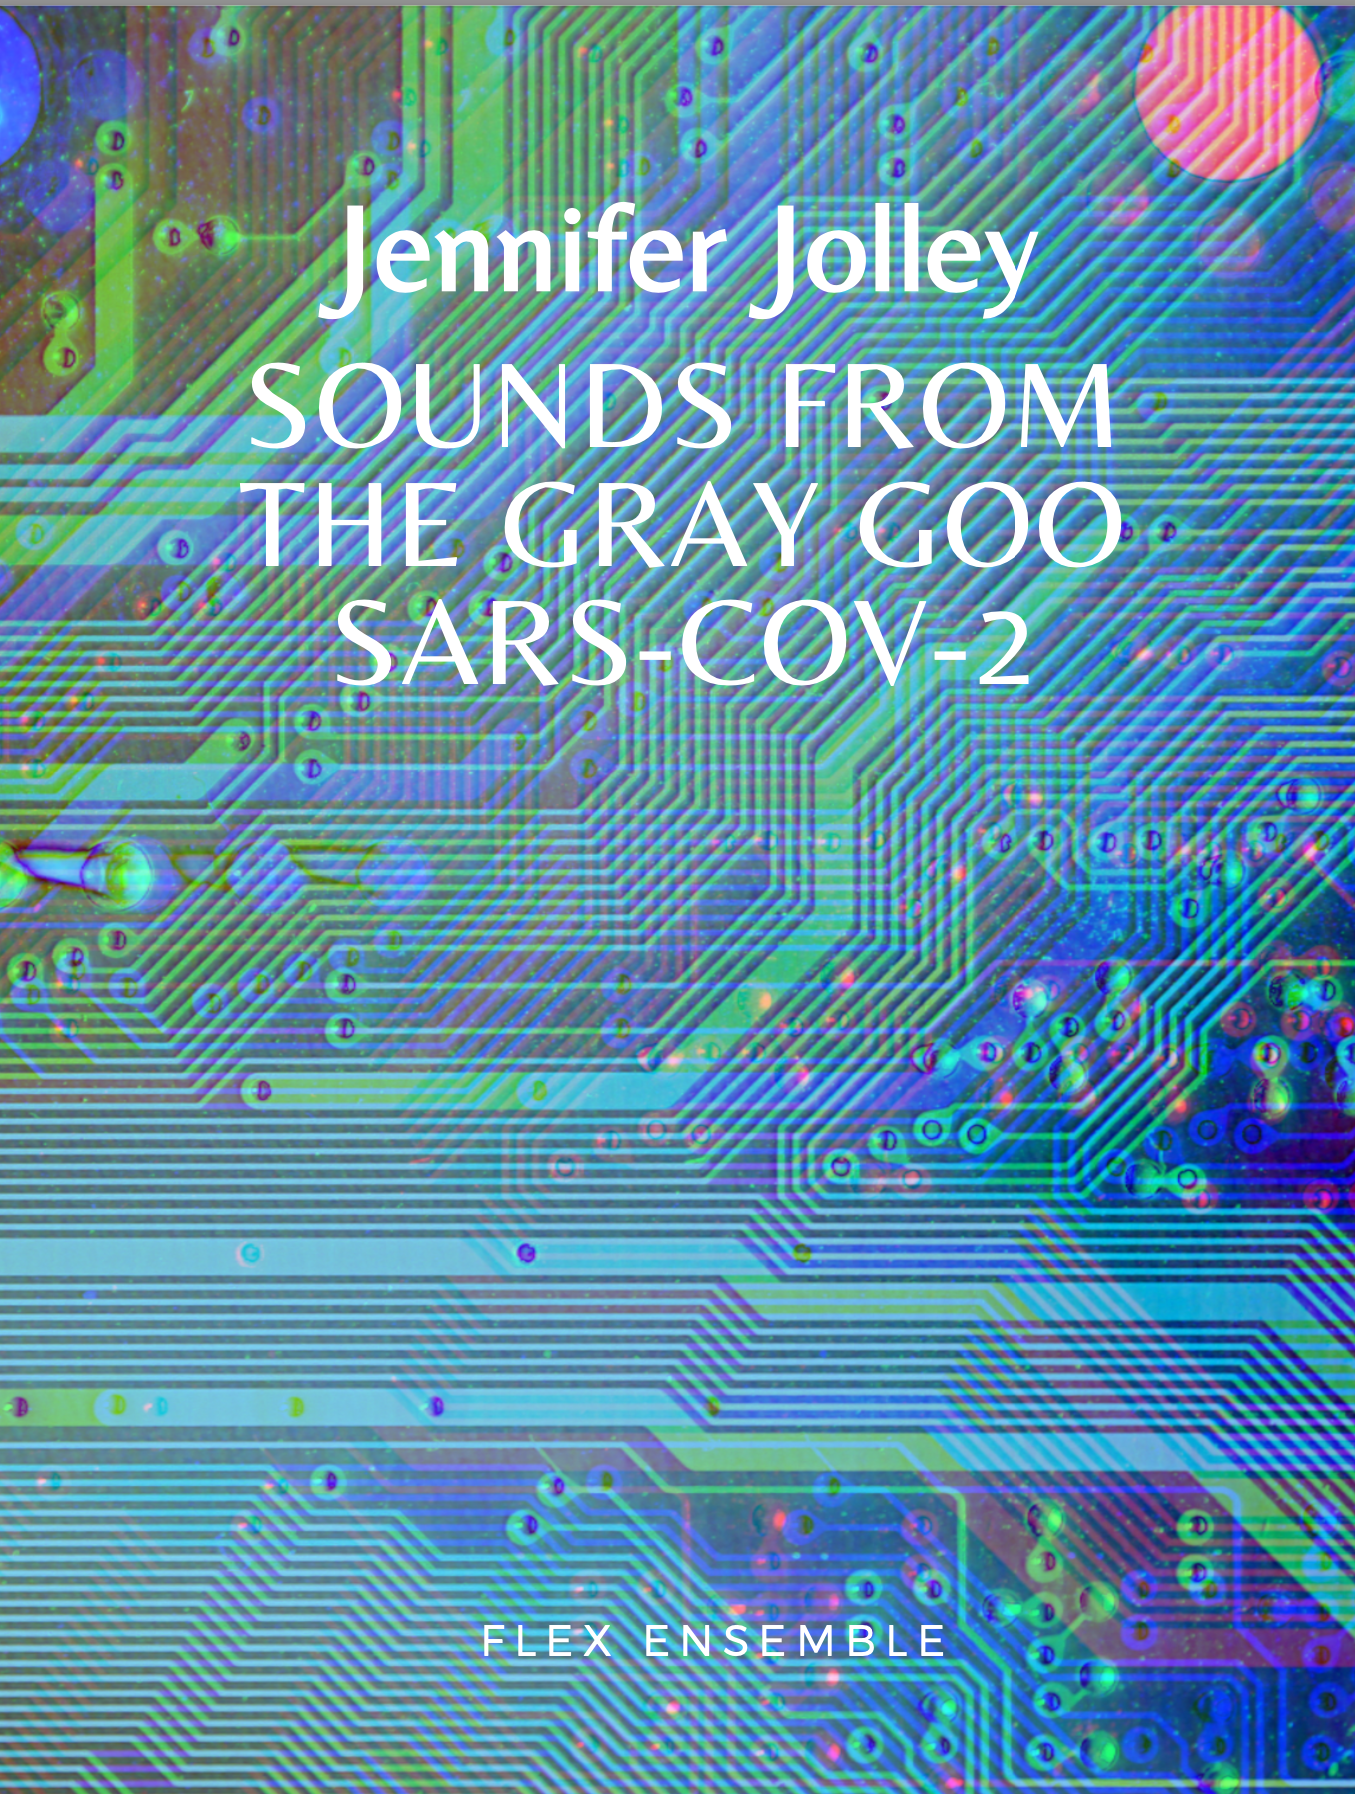 Sounds From The Gray Goo by Jennifer Jolley